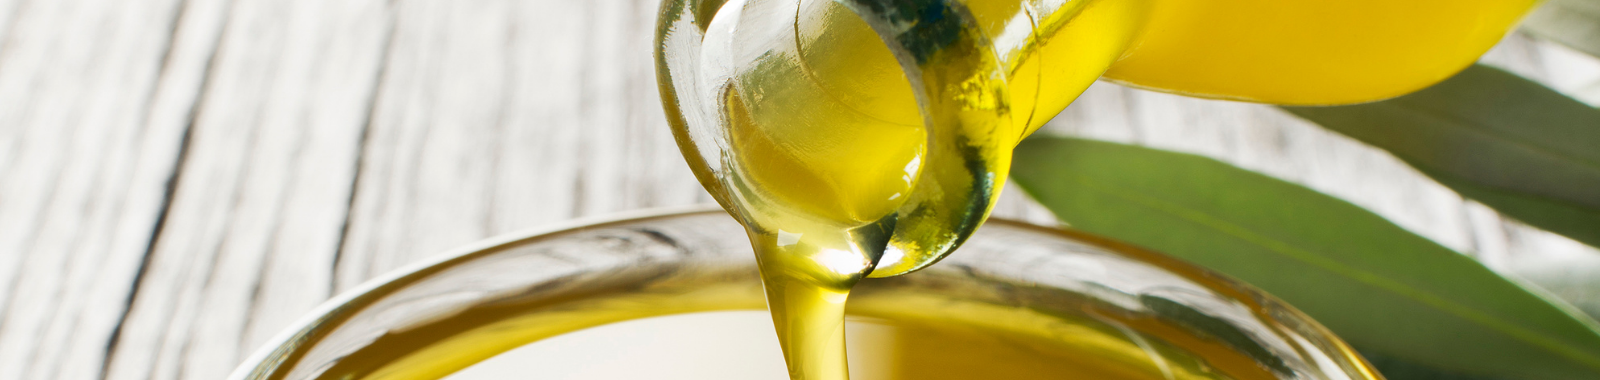 Oils and fats